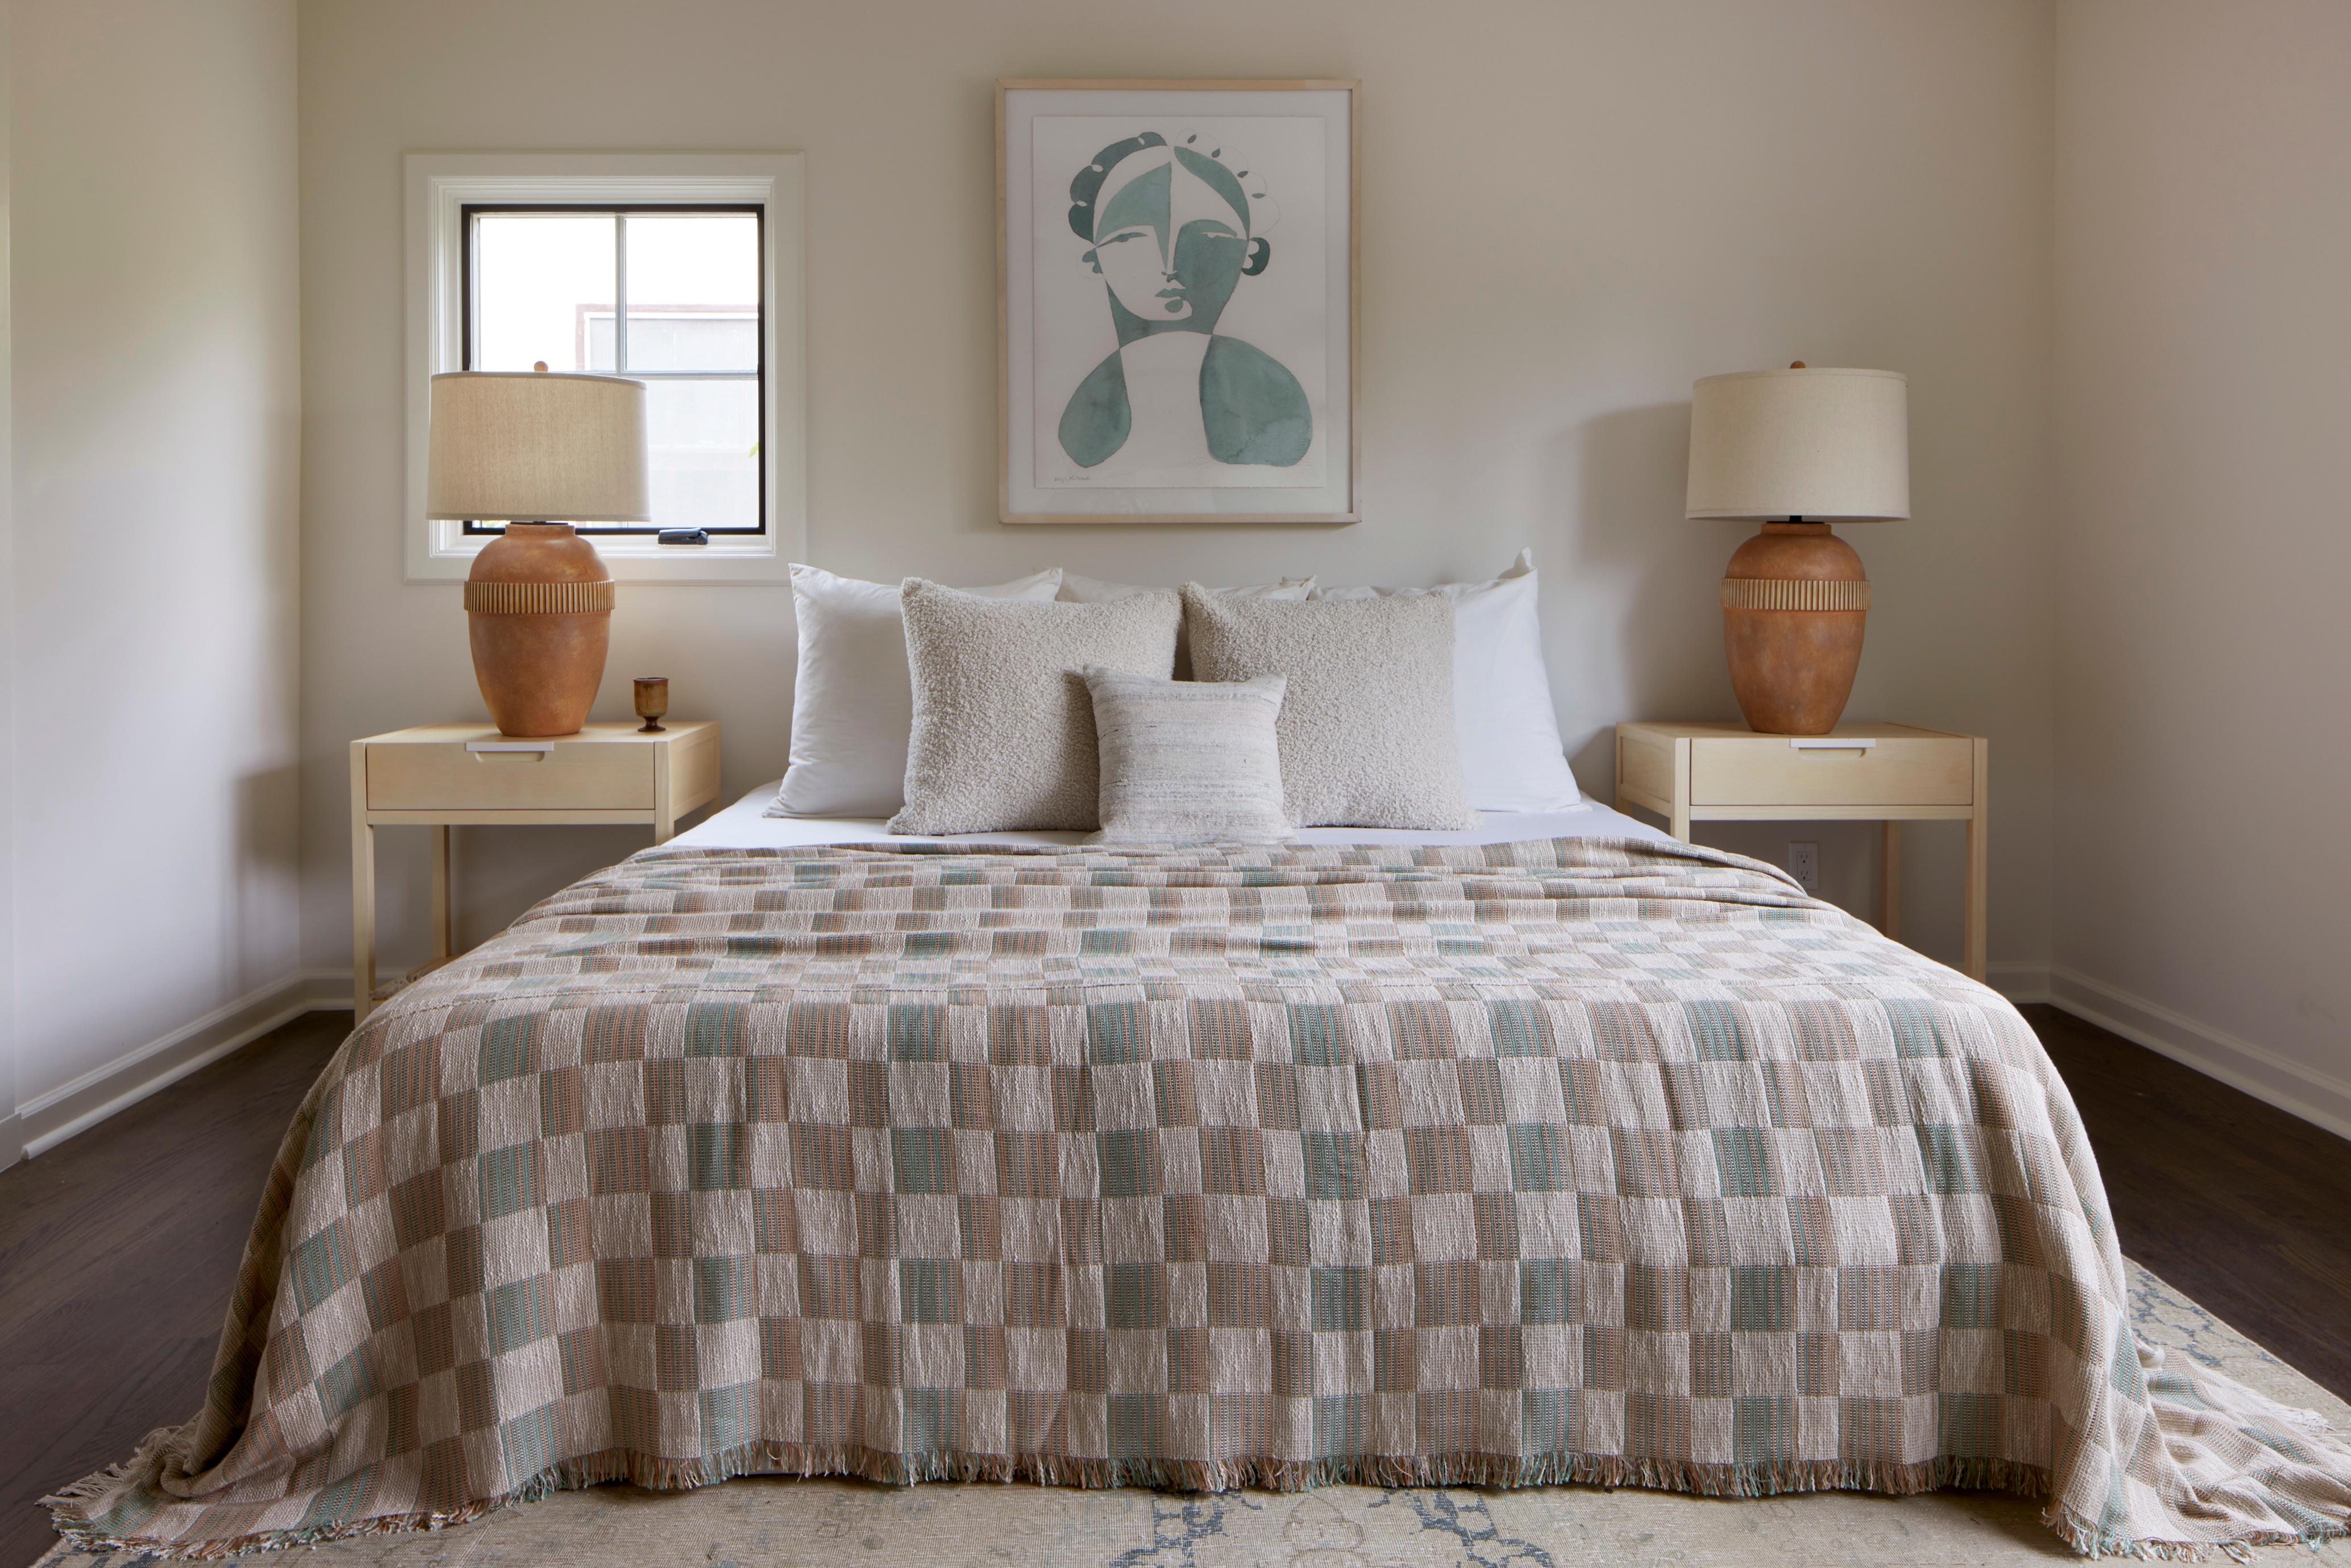 The 'Mariana' bedspread is designed by Folk Textiles—a LA based brand dedicated to thoughtful living. This textile is woven in the UK using sustainably-dyed organic cotton from Italy. 

The 'Mariana' pattern in particular is inspired by oceanic